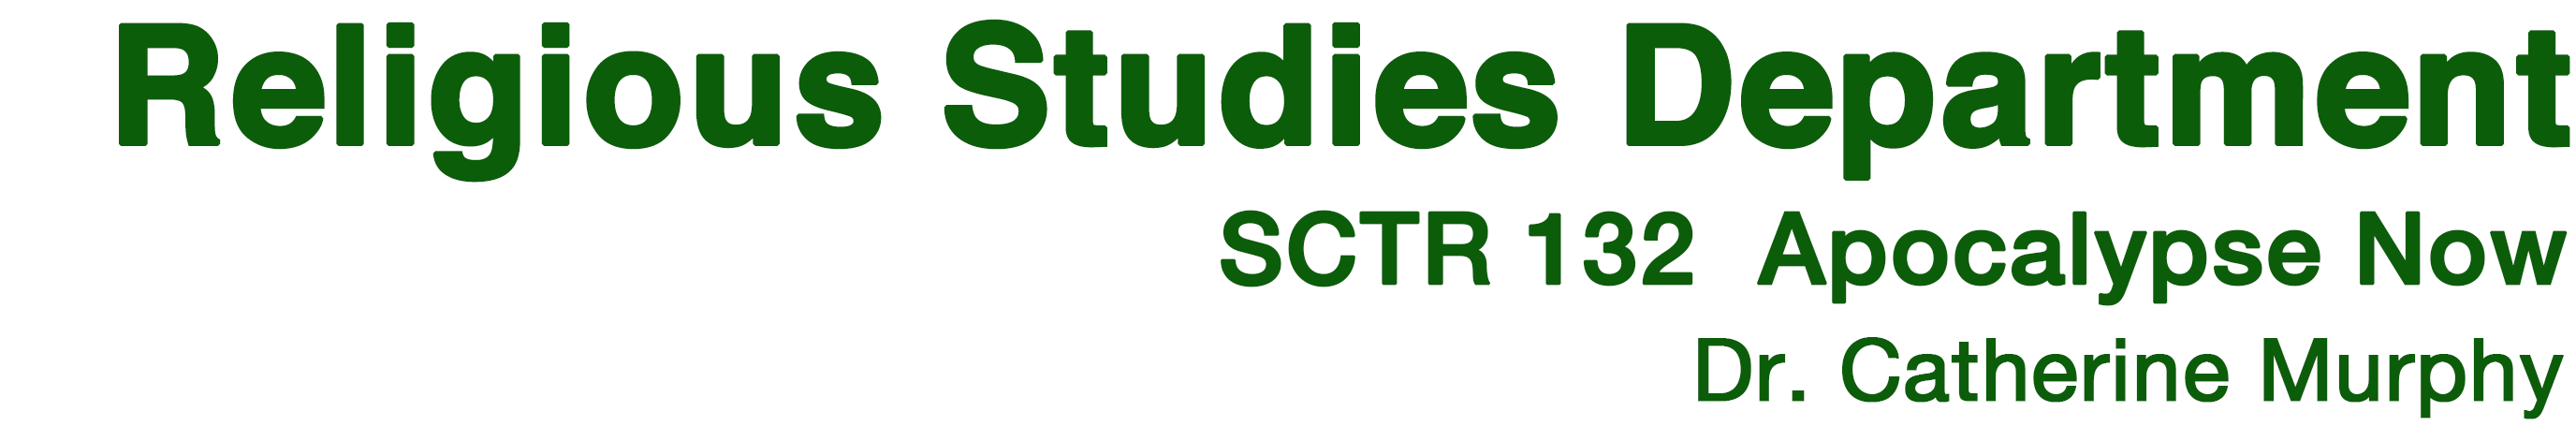 SCTR 132 Home Page